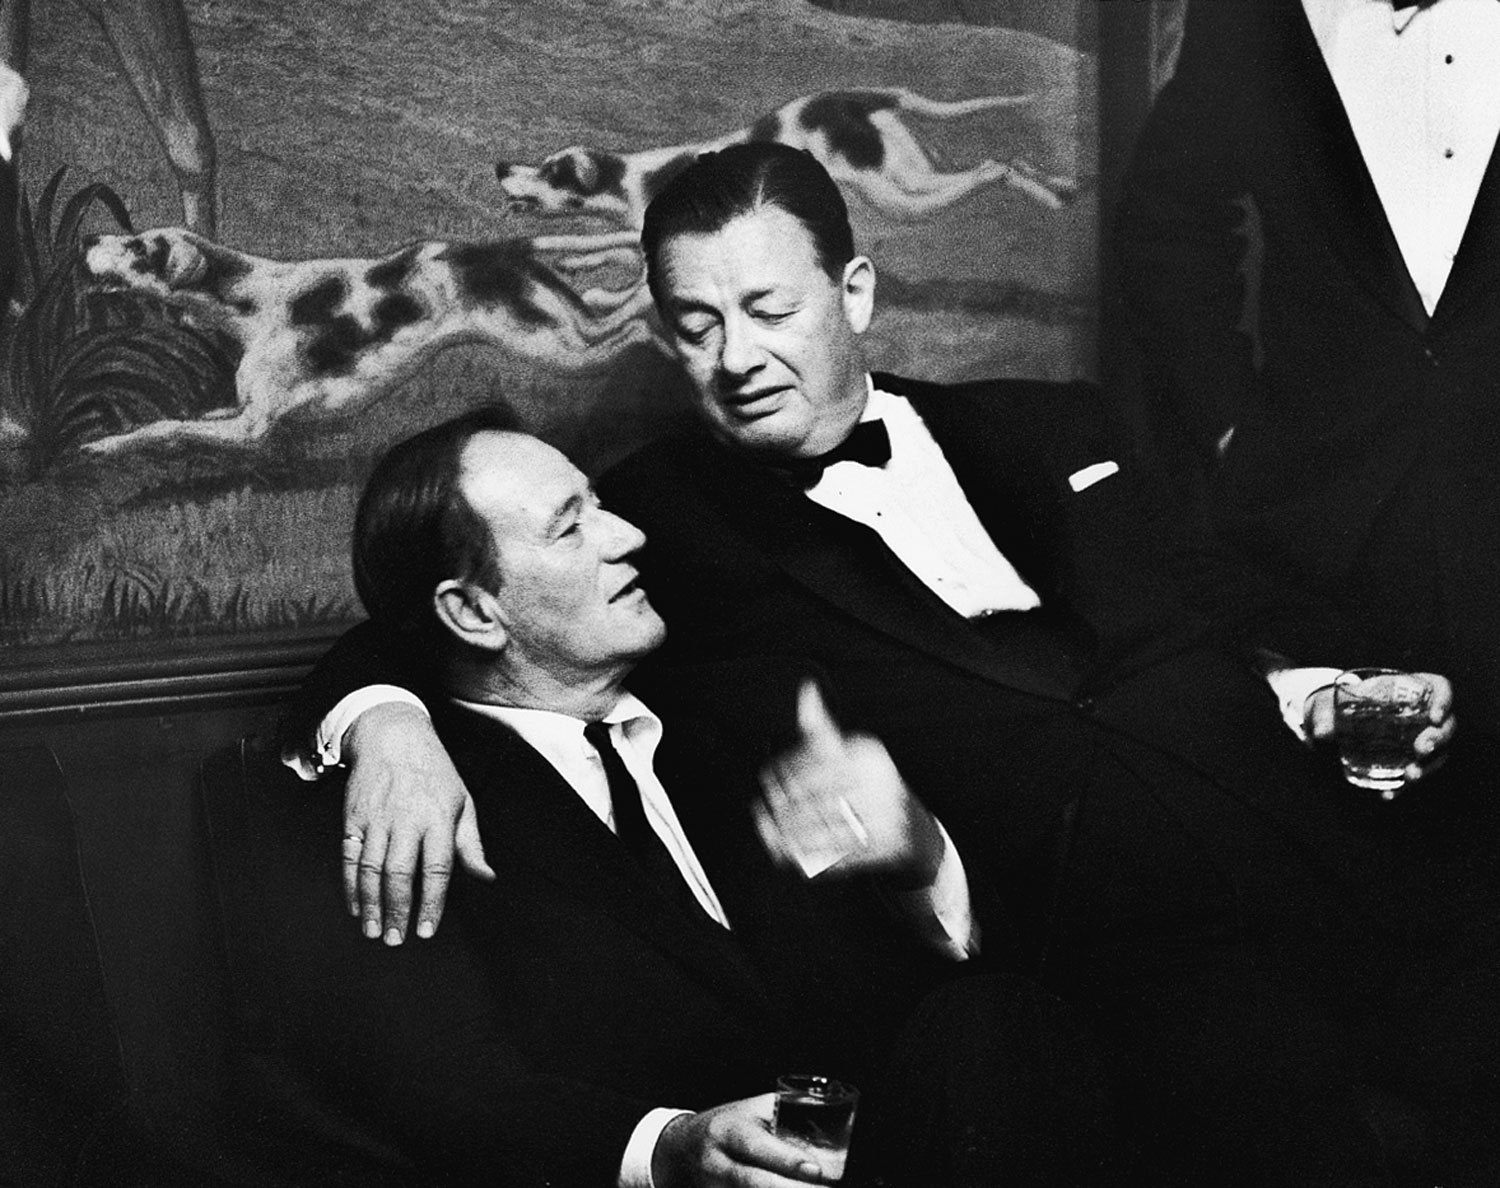 Legendary saloonkeeper Toots Shor (right) with John Wayne on closing night at Shor's famous New York watering hole, 1959.